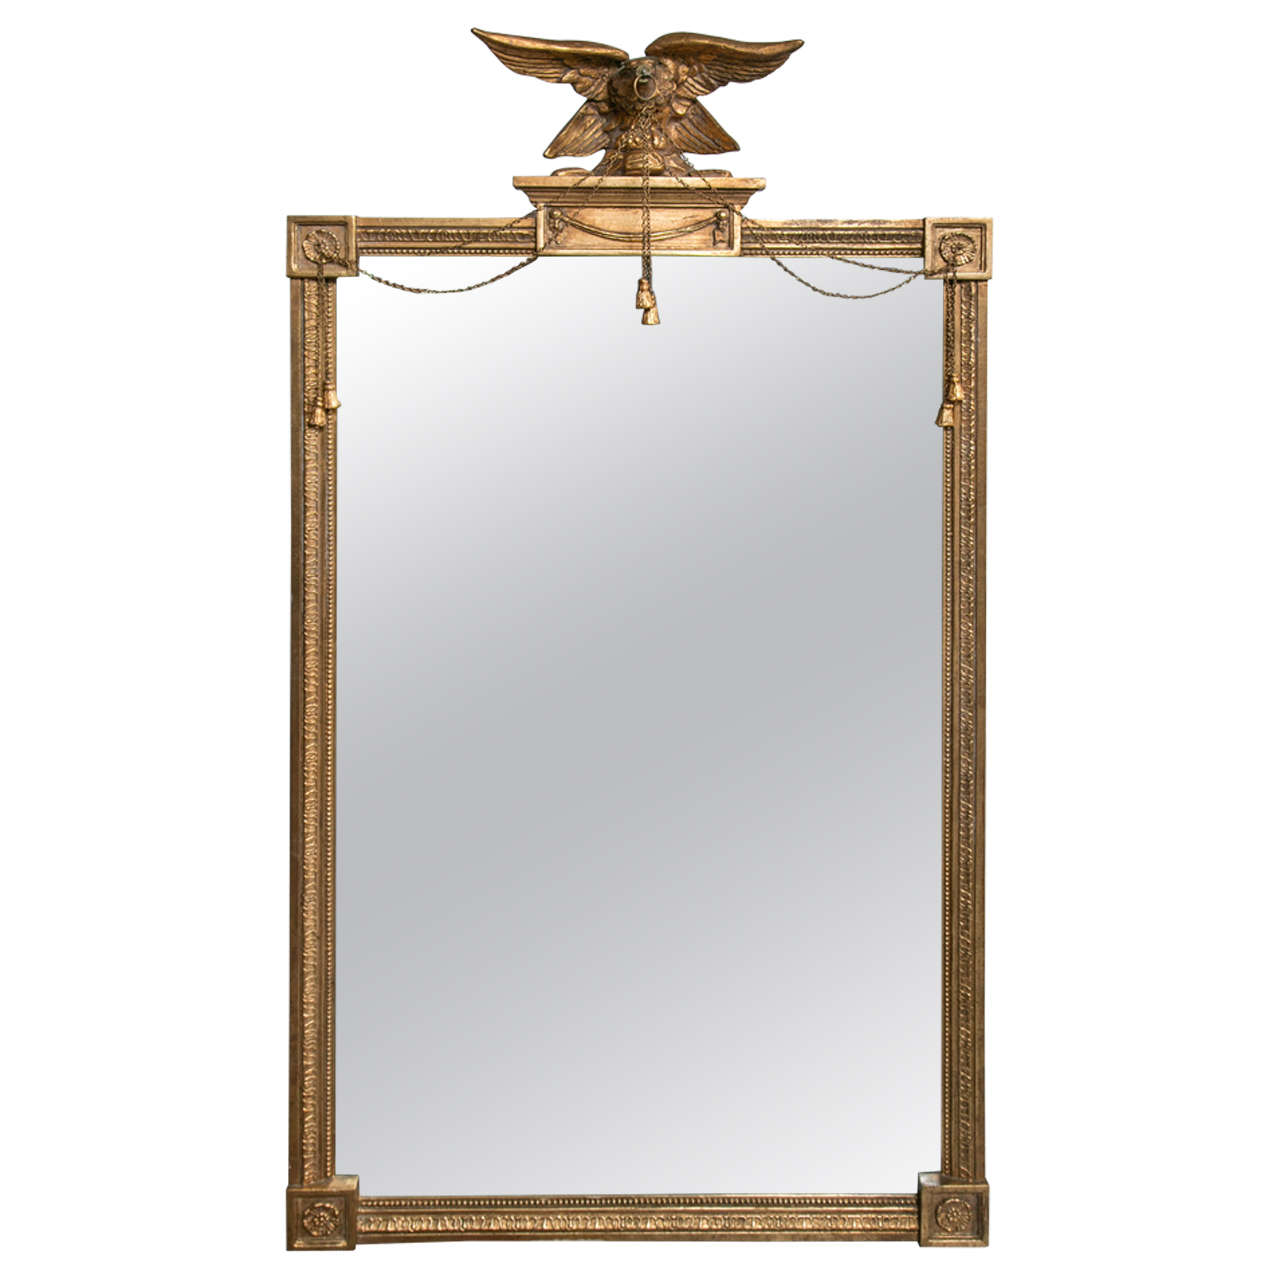 A Fine Federal Style Antique Mirror with Gilt Carved Eagle Exquisite Detail 